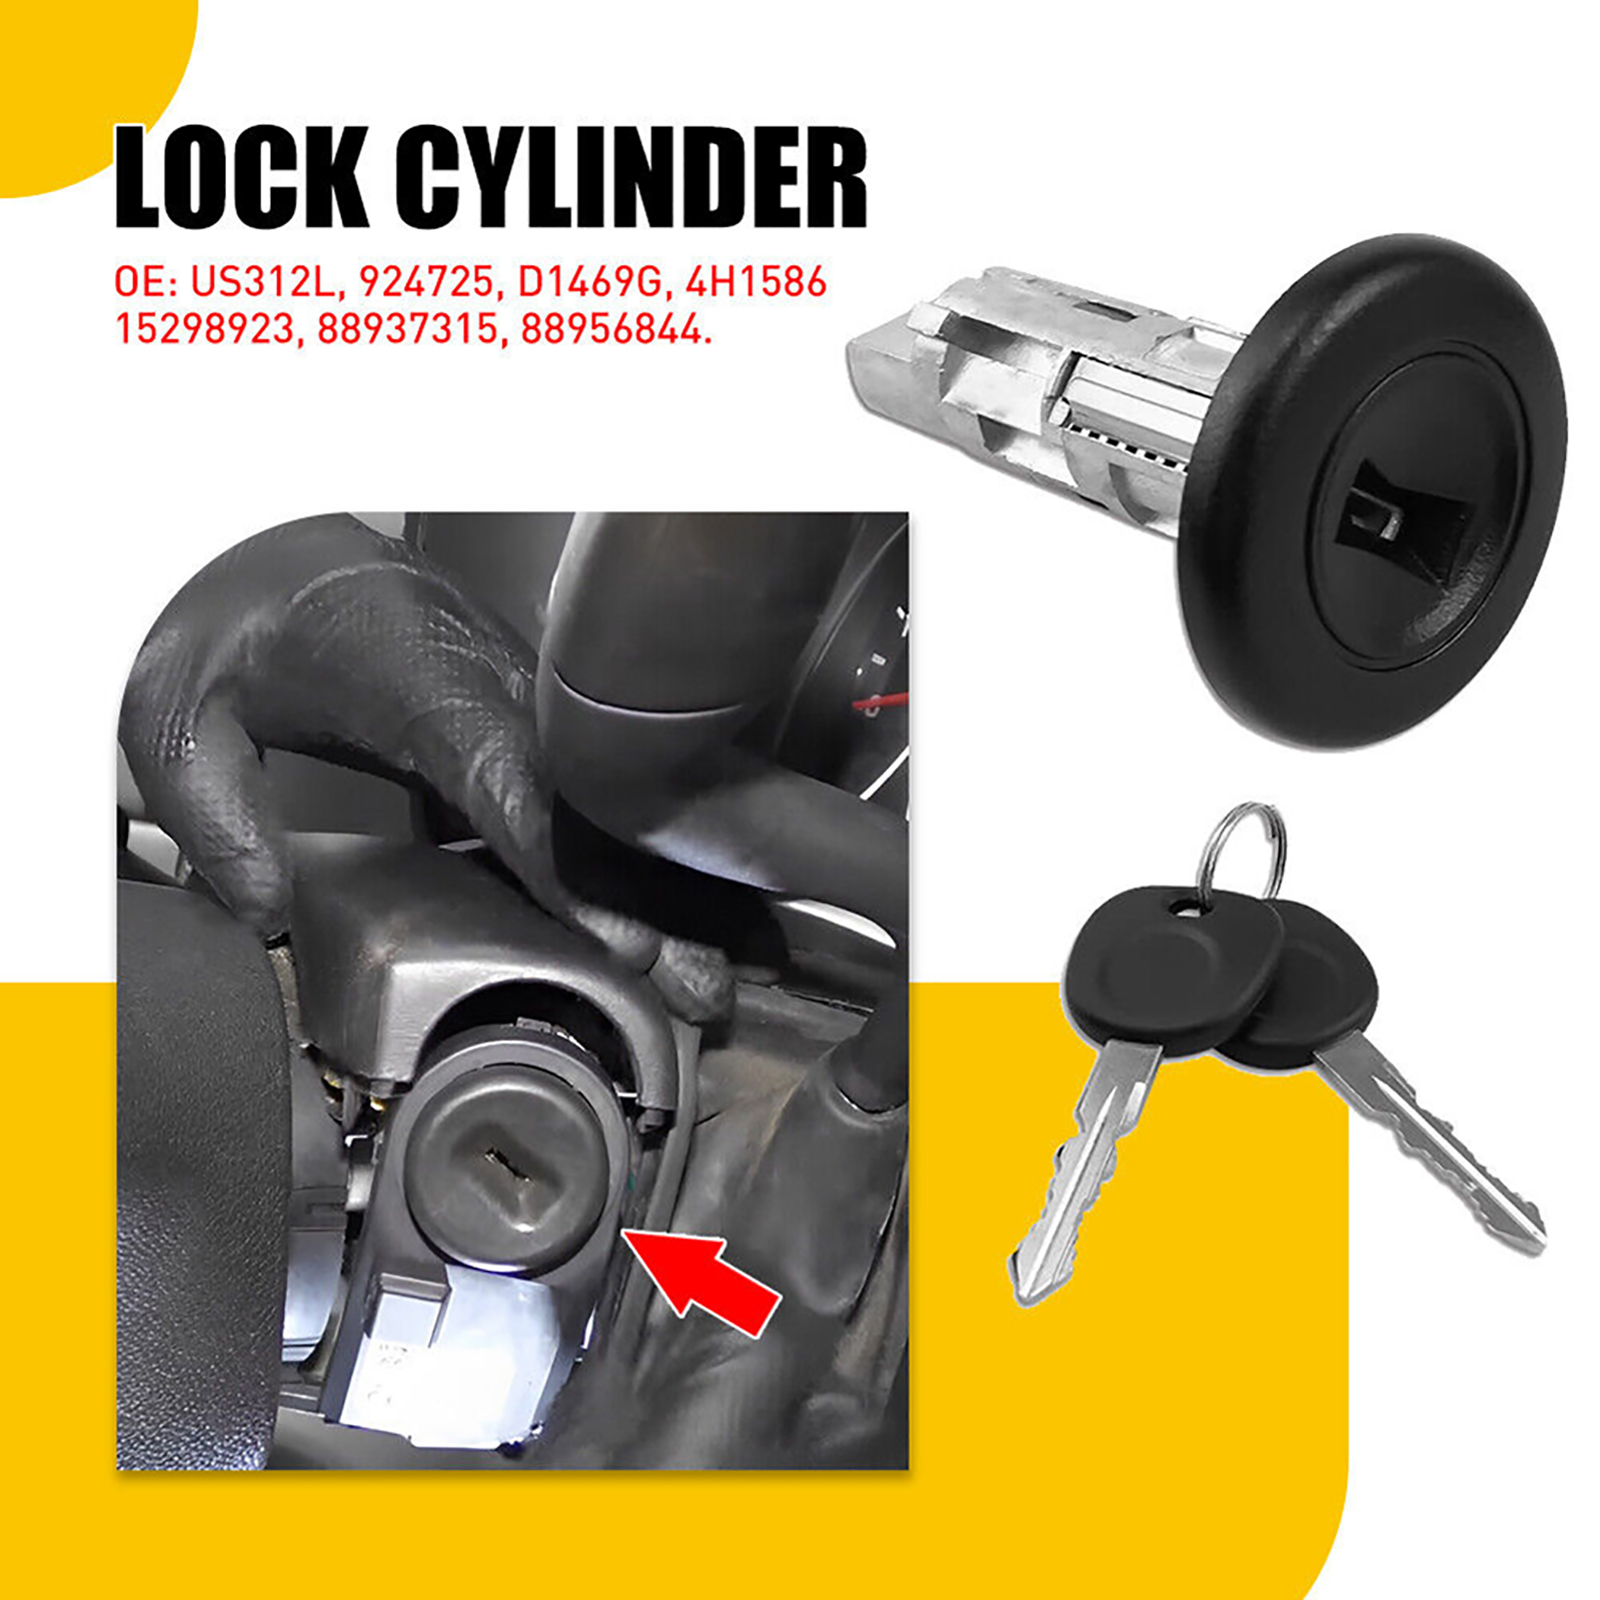 Ignition Switch Cylinder Lock Assembly 15298923 Replaces Ignition Start Switch Lock With Keys Compatible For 1500